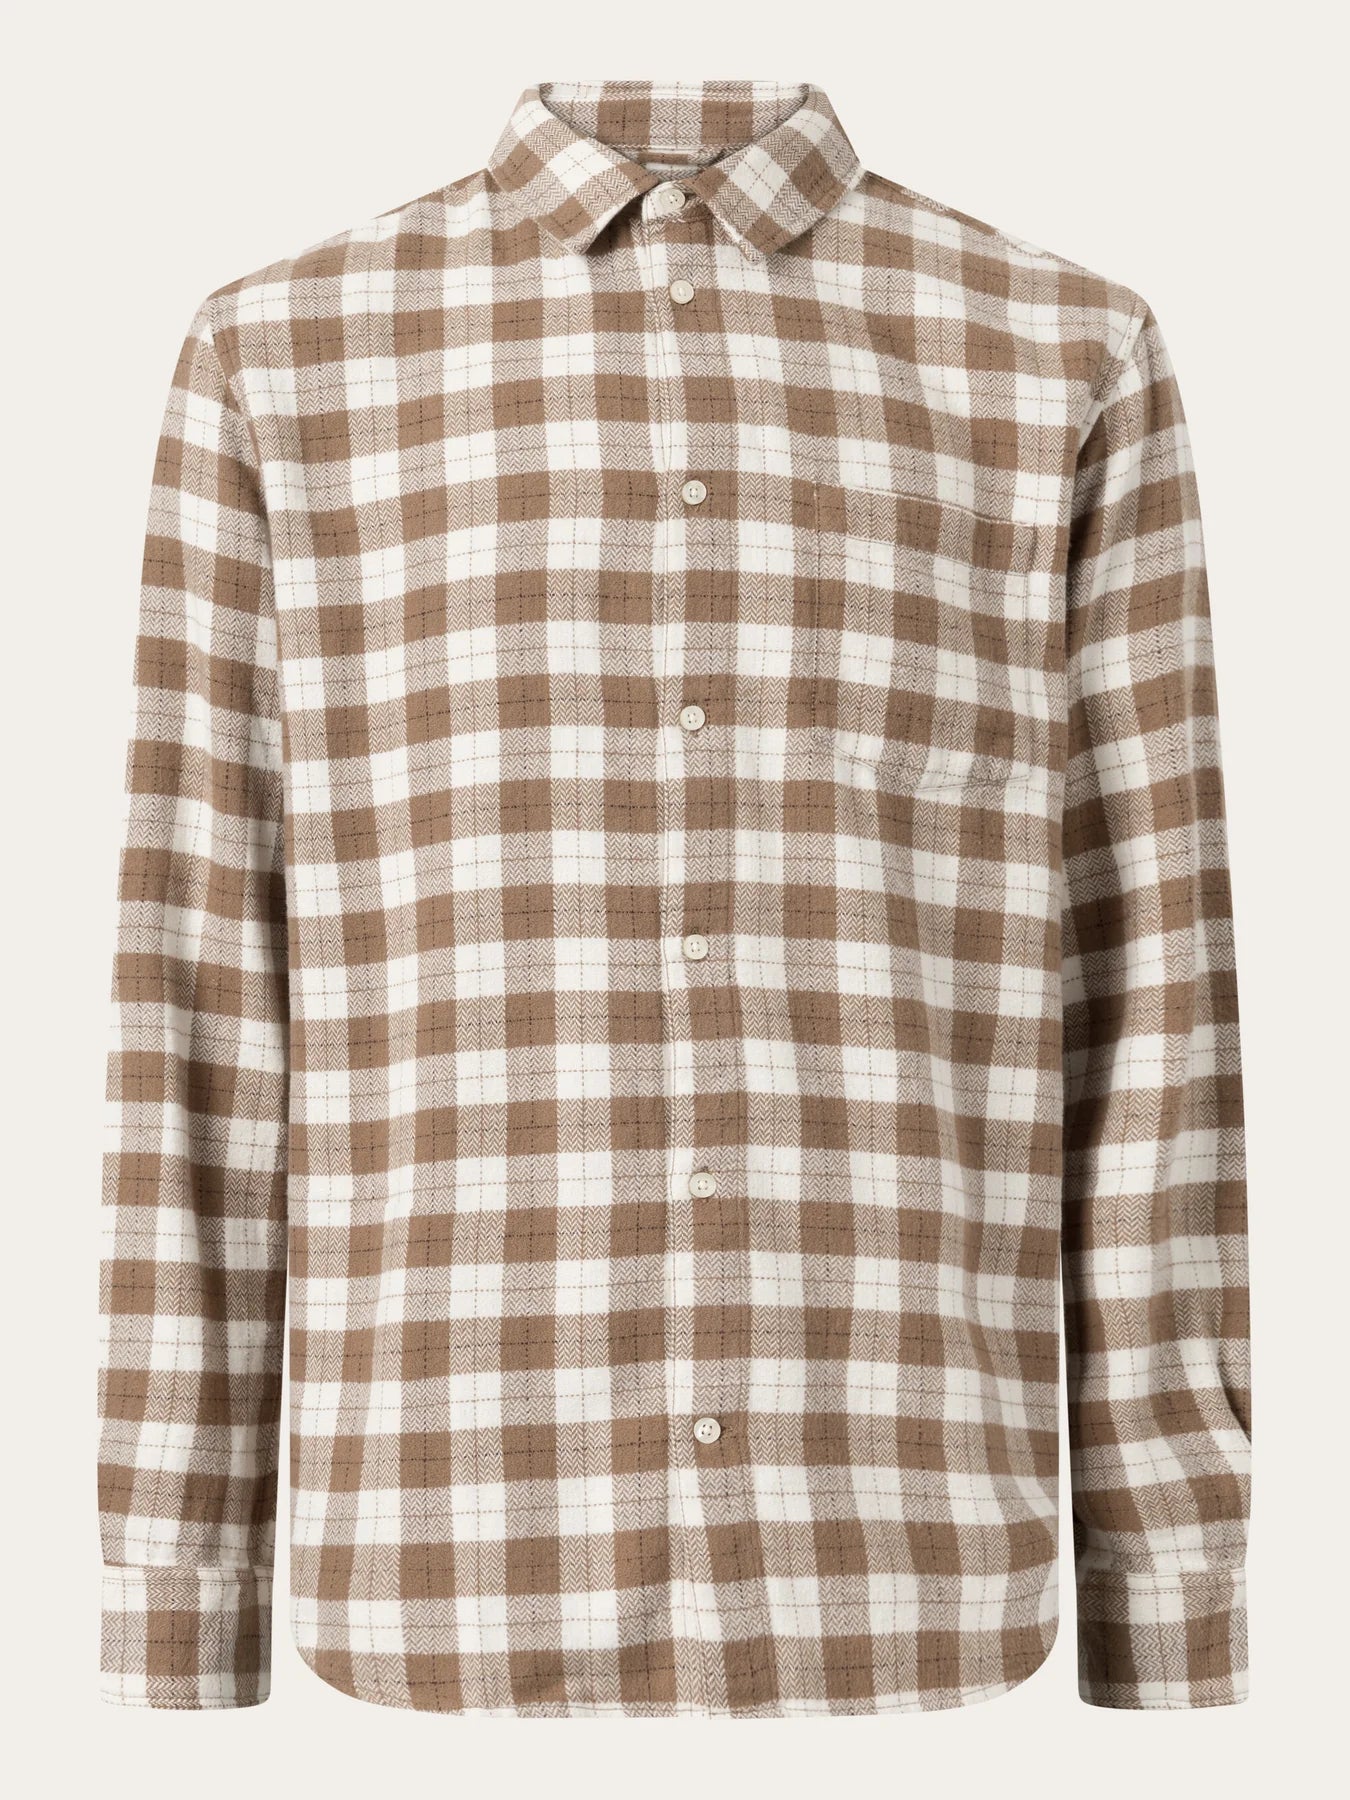 KnowledgeCotton Apparel - M's Loose fit checkered shirt - 100% Organic Cotton - Weekendbee - sustainable sportswear